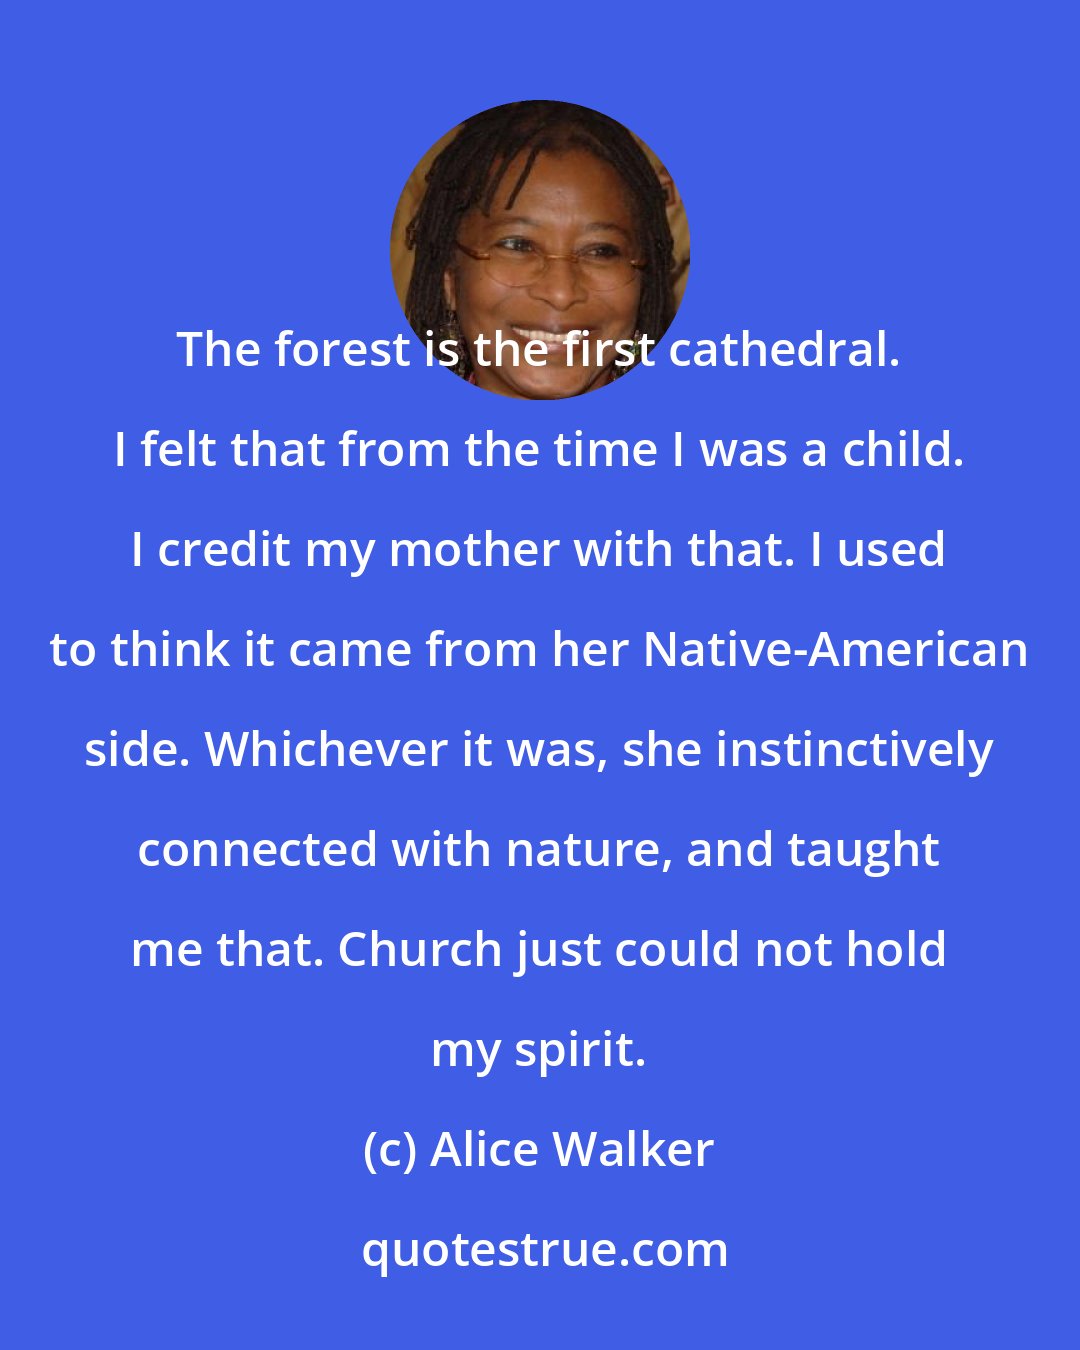 Alice Walker: The forest is the first cathedral. I felt that from the time I was a child. I credit my mother with that. I used to think it came from her Native-American side. Whichever it was, she instinctively connected with nature, and taught me that. Church just could not hold my spirit.